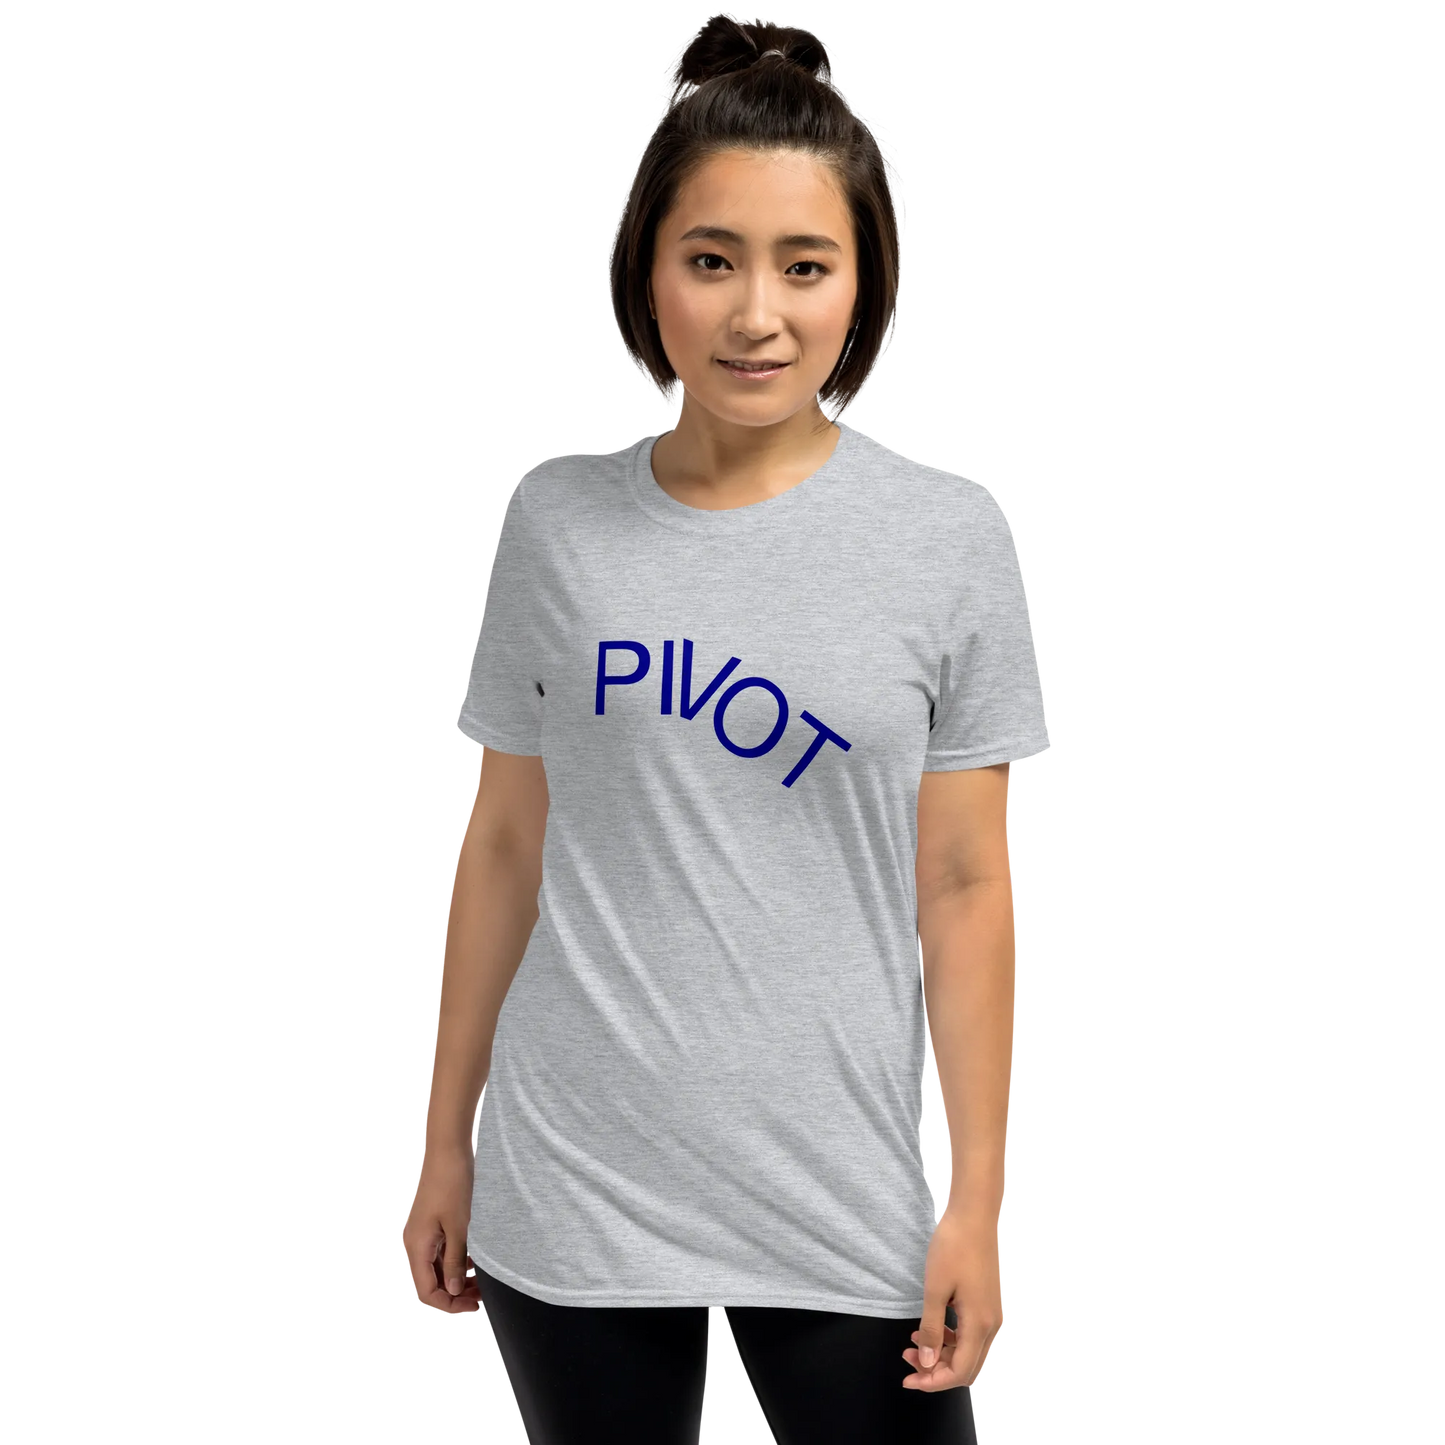 Pivot Tee in Sport Grey on woman front